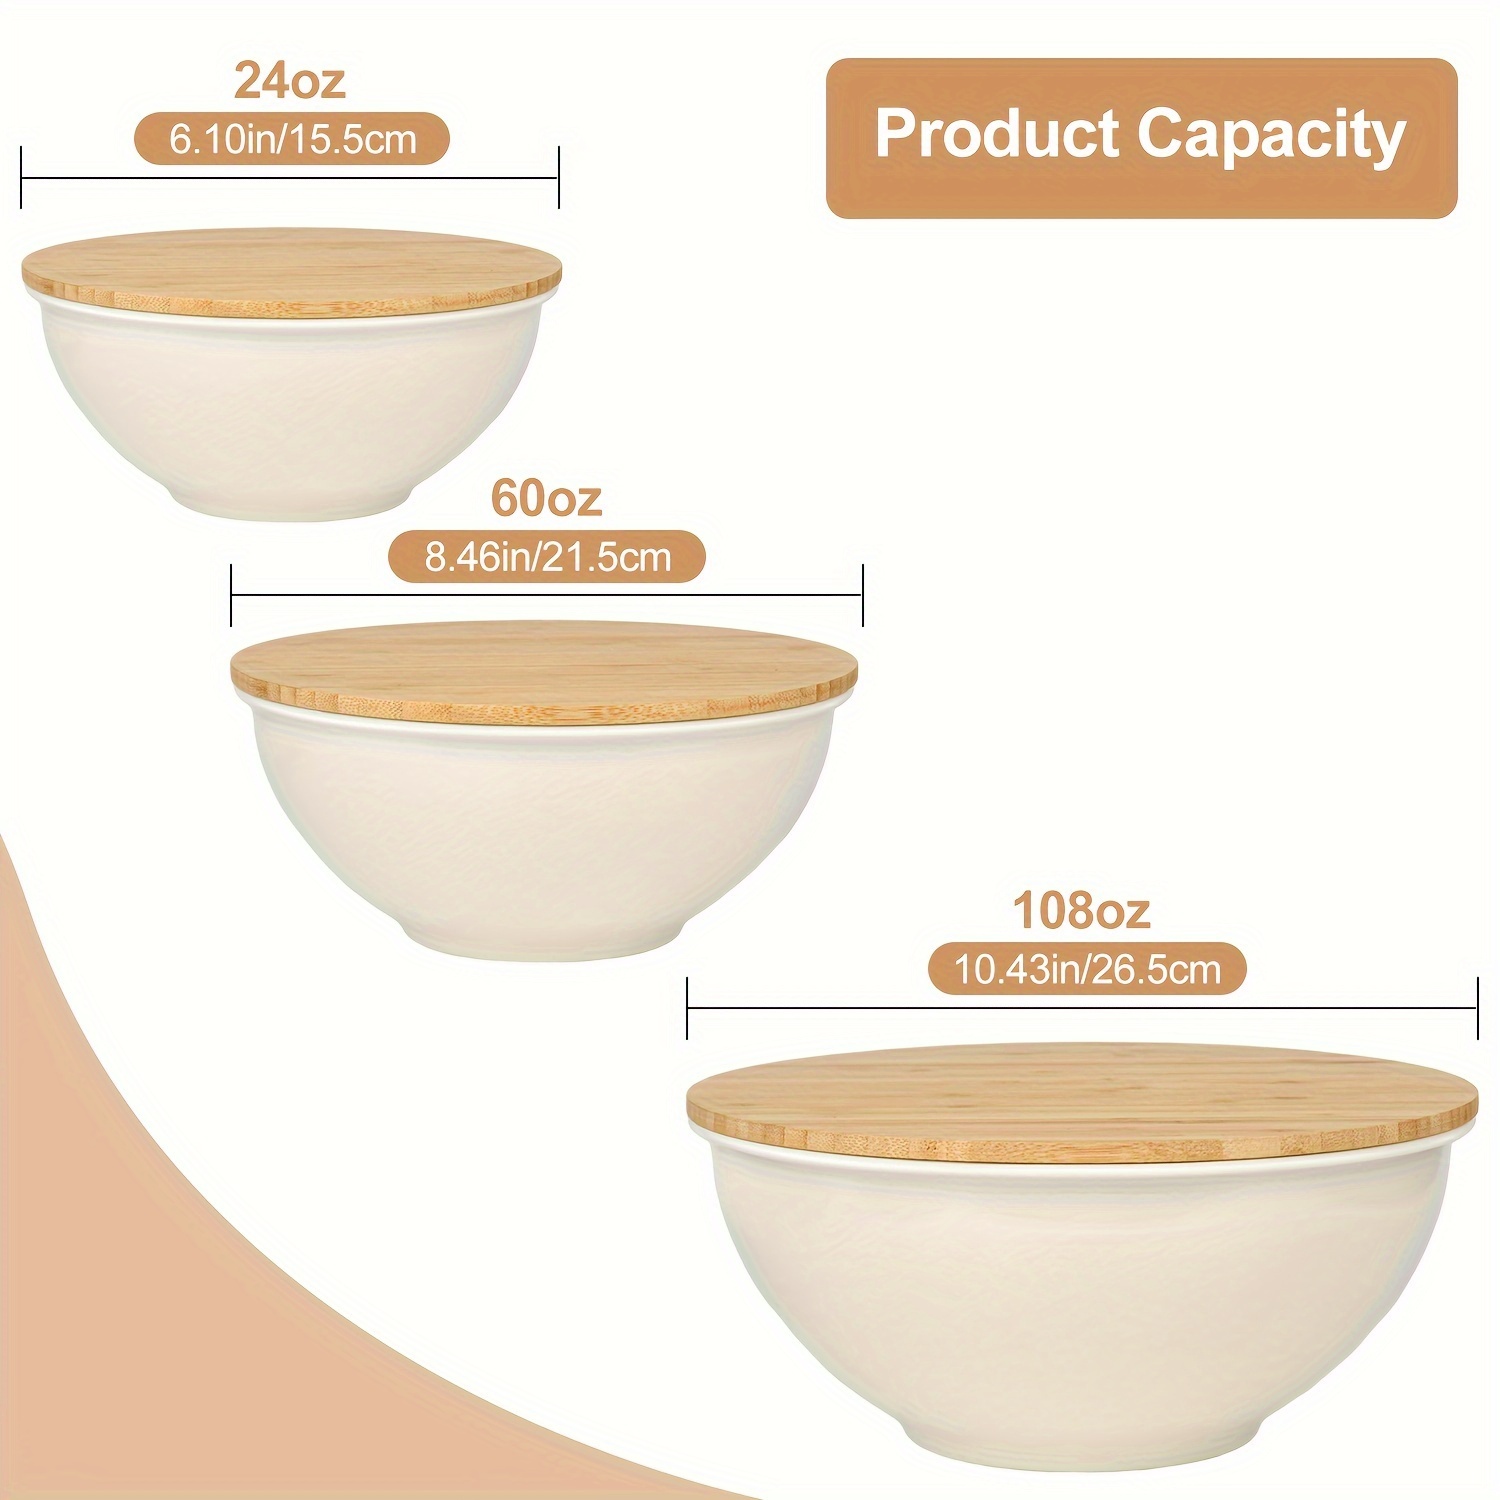 3pcs, Salad Mixing Bowls With Lids, 10 Large Mixing Bowls Set, Bamboo  Salad Bowl, Salad Serving Bowl Set For Salad, Fruits, Pasta, Popcorn,  Chips, Ve